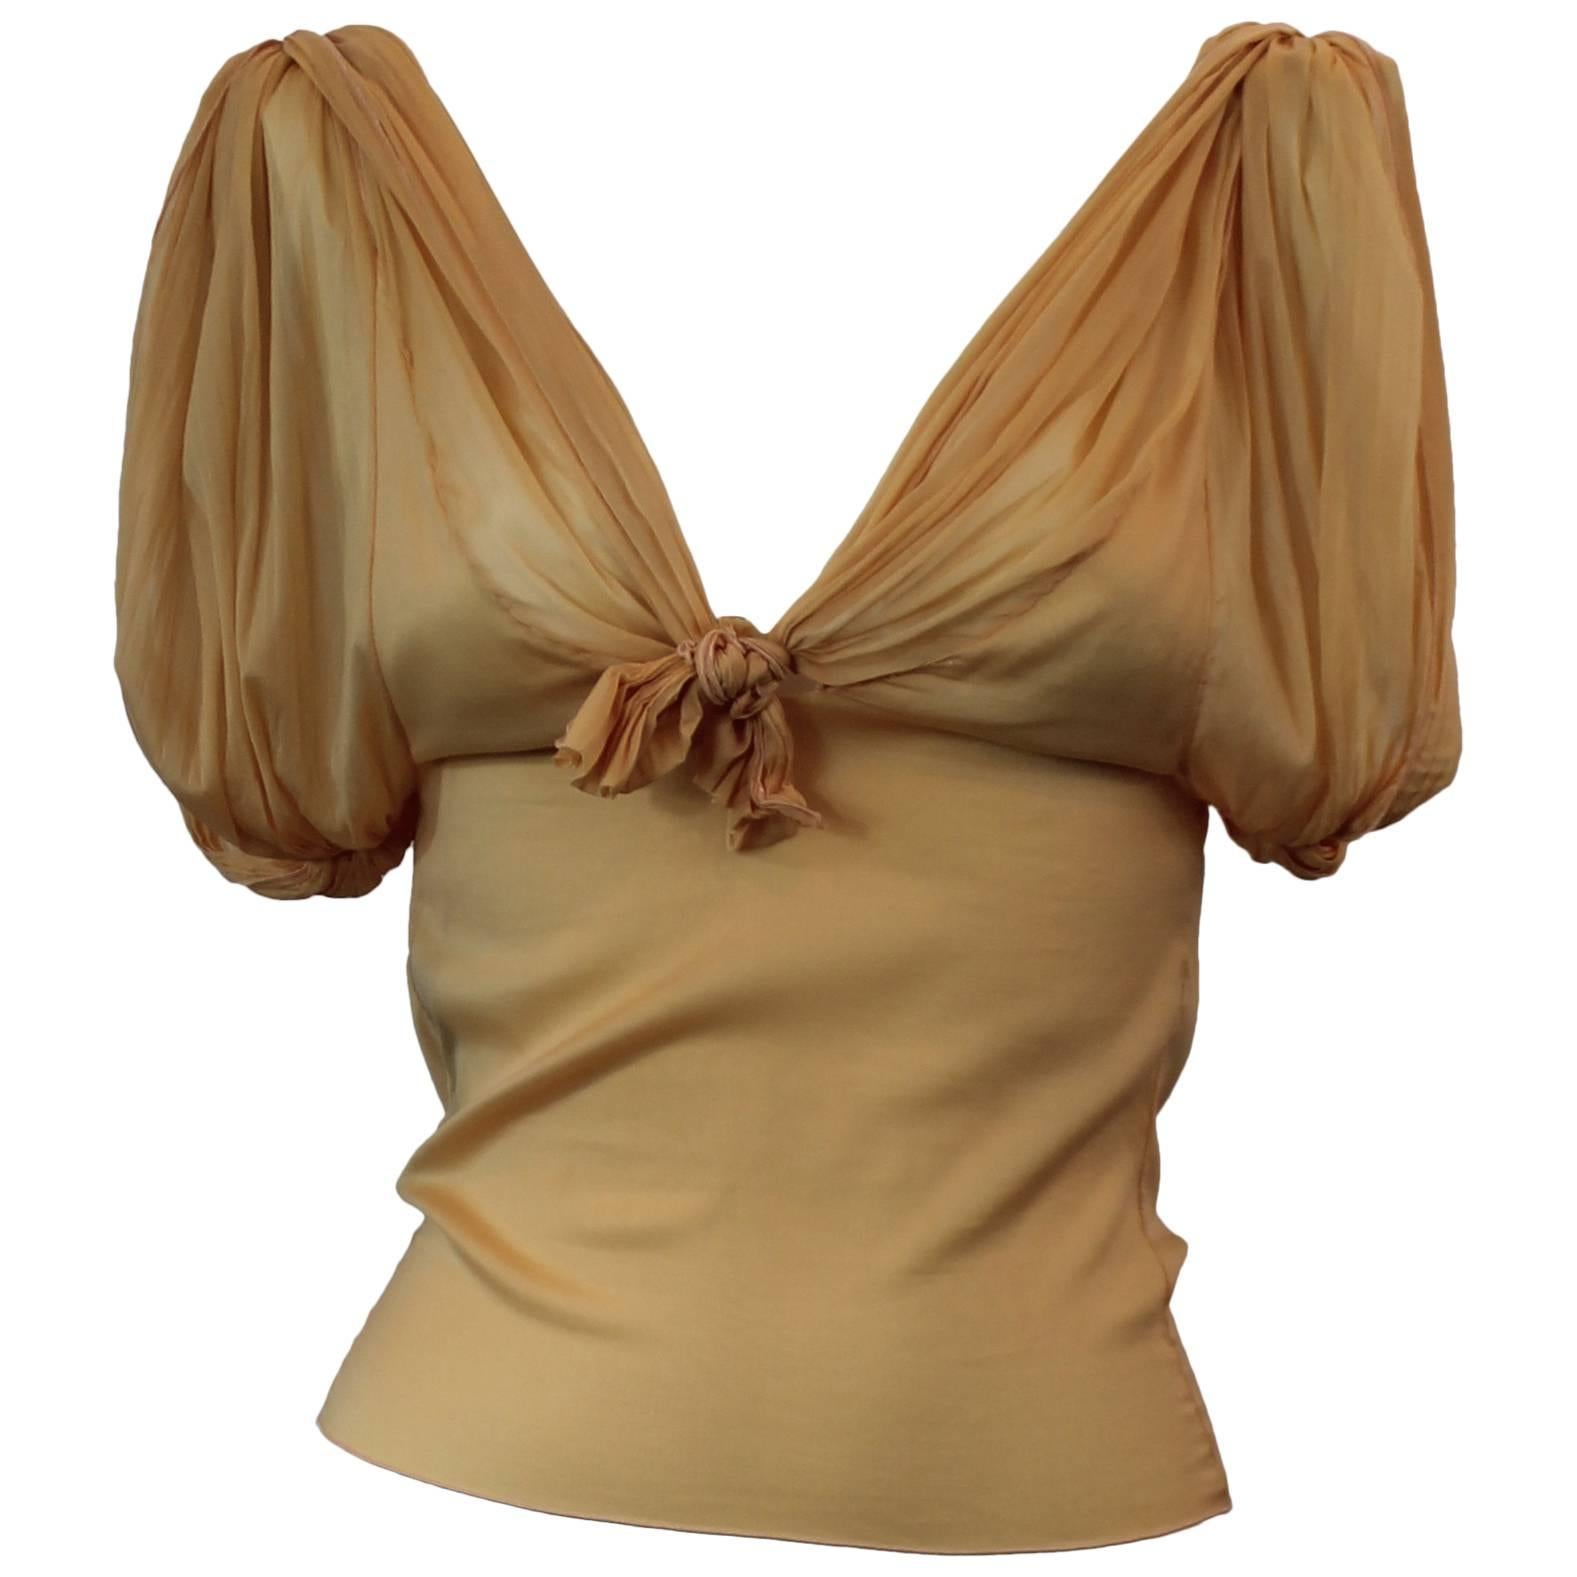 Christian Dior Mustard Colored Silk Ruched Sleeveless Blouse with Ties - S